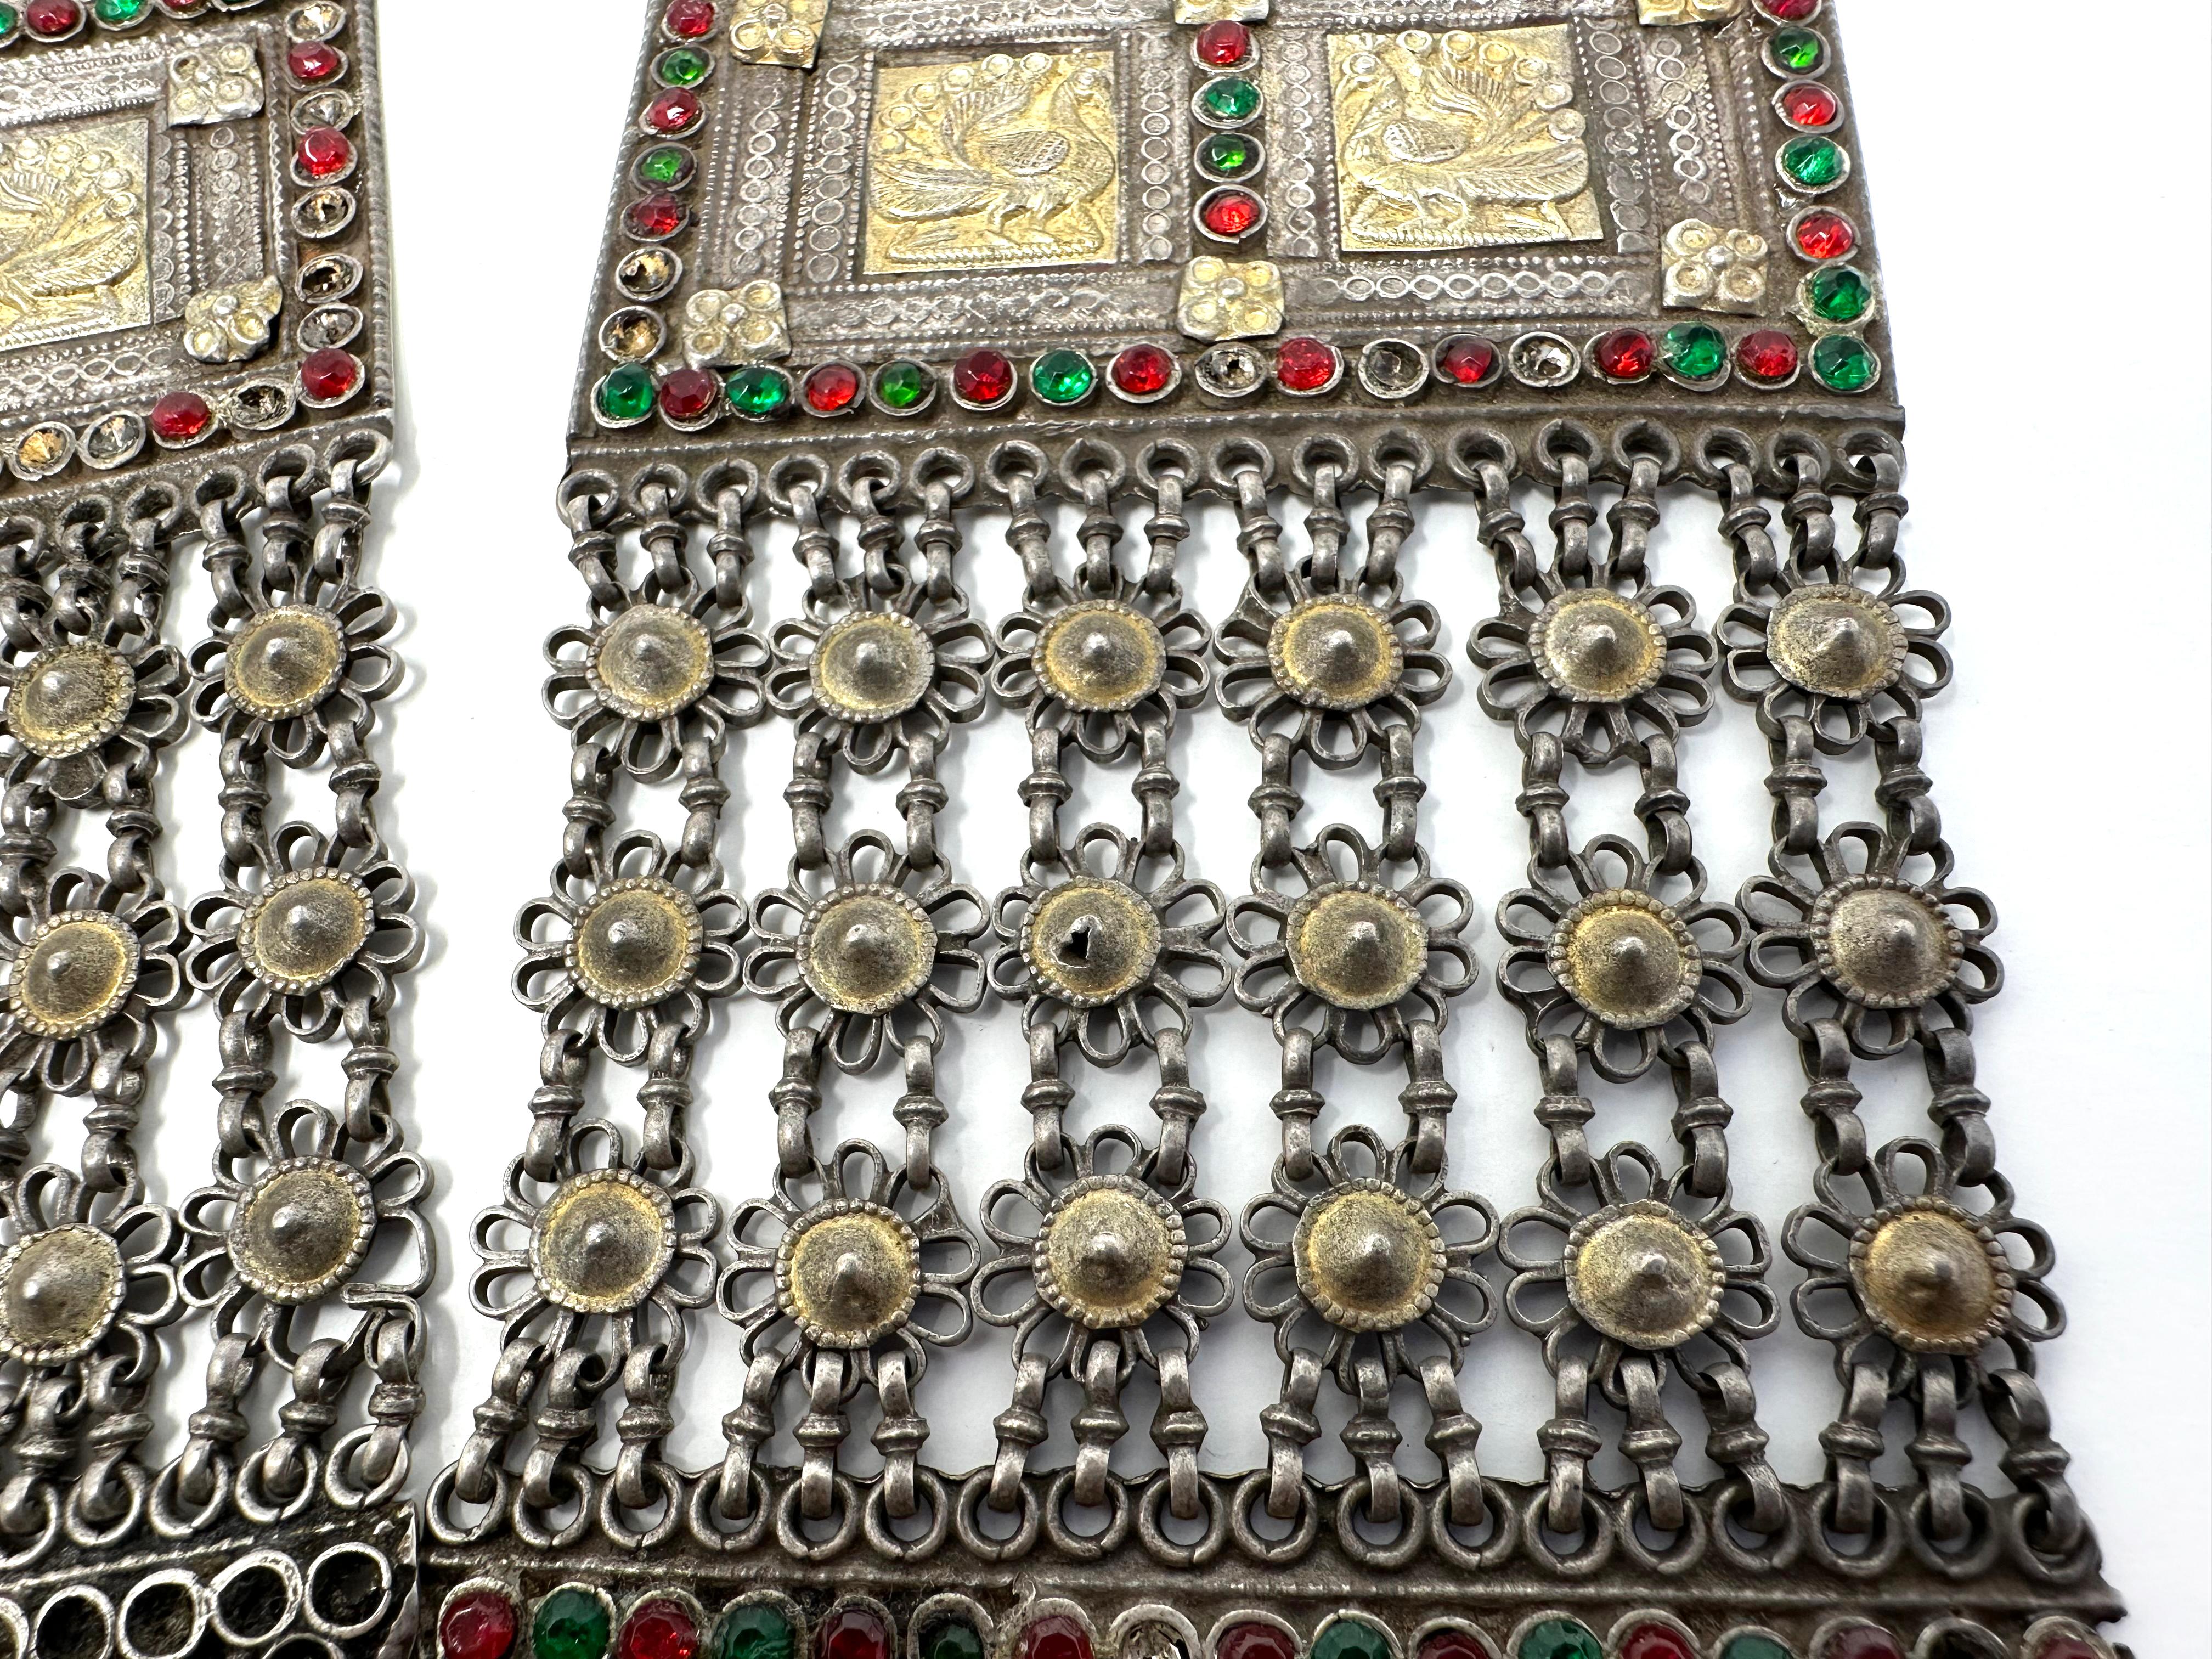 Important Early 20th Century Mughal Prayer Necklace, Silver and Gold wash, Heavy For Sale 1